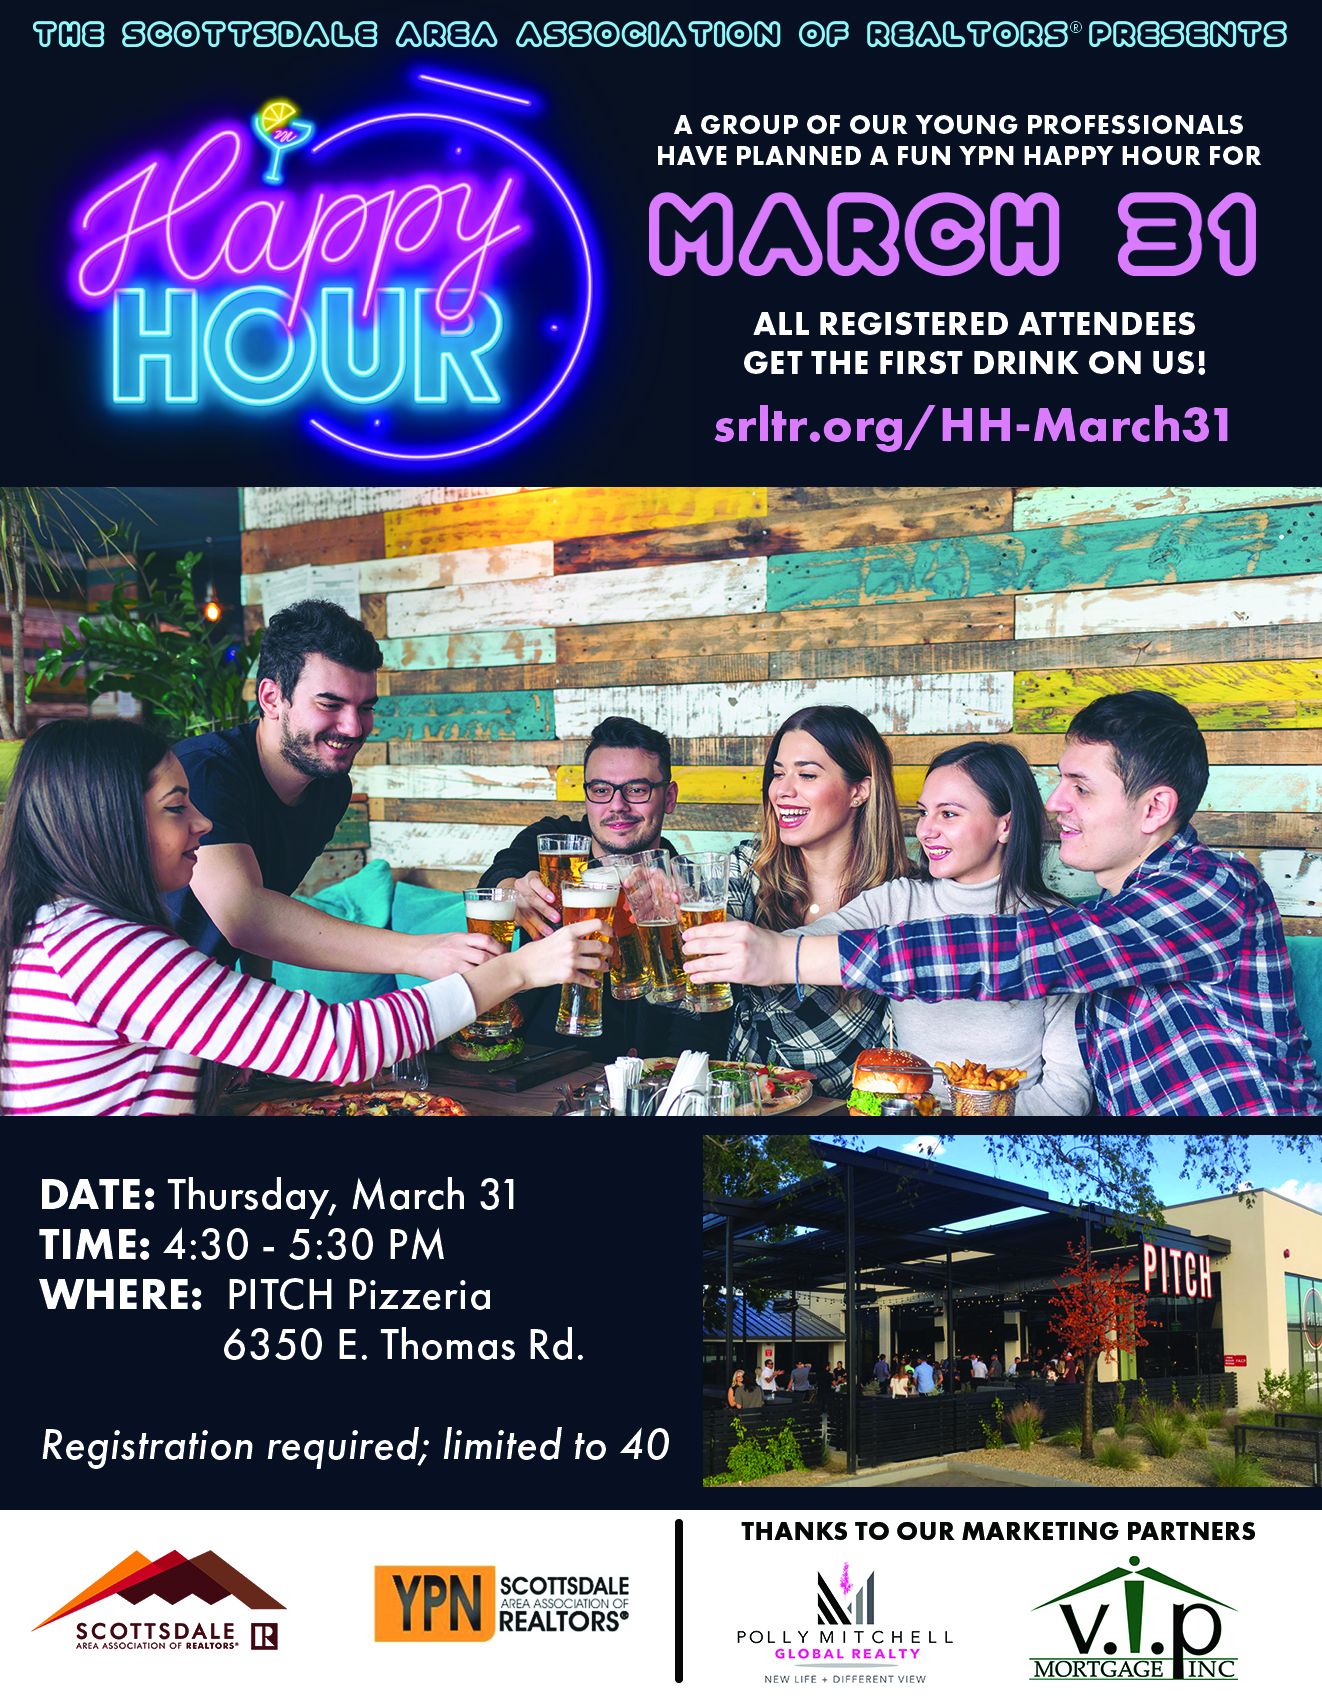 Scottsdale Area Association of REALTORS presents YPN Happy Hour on March 31, 2022